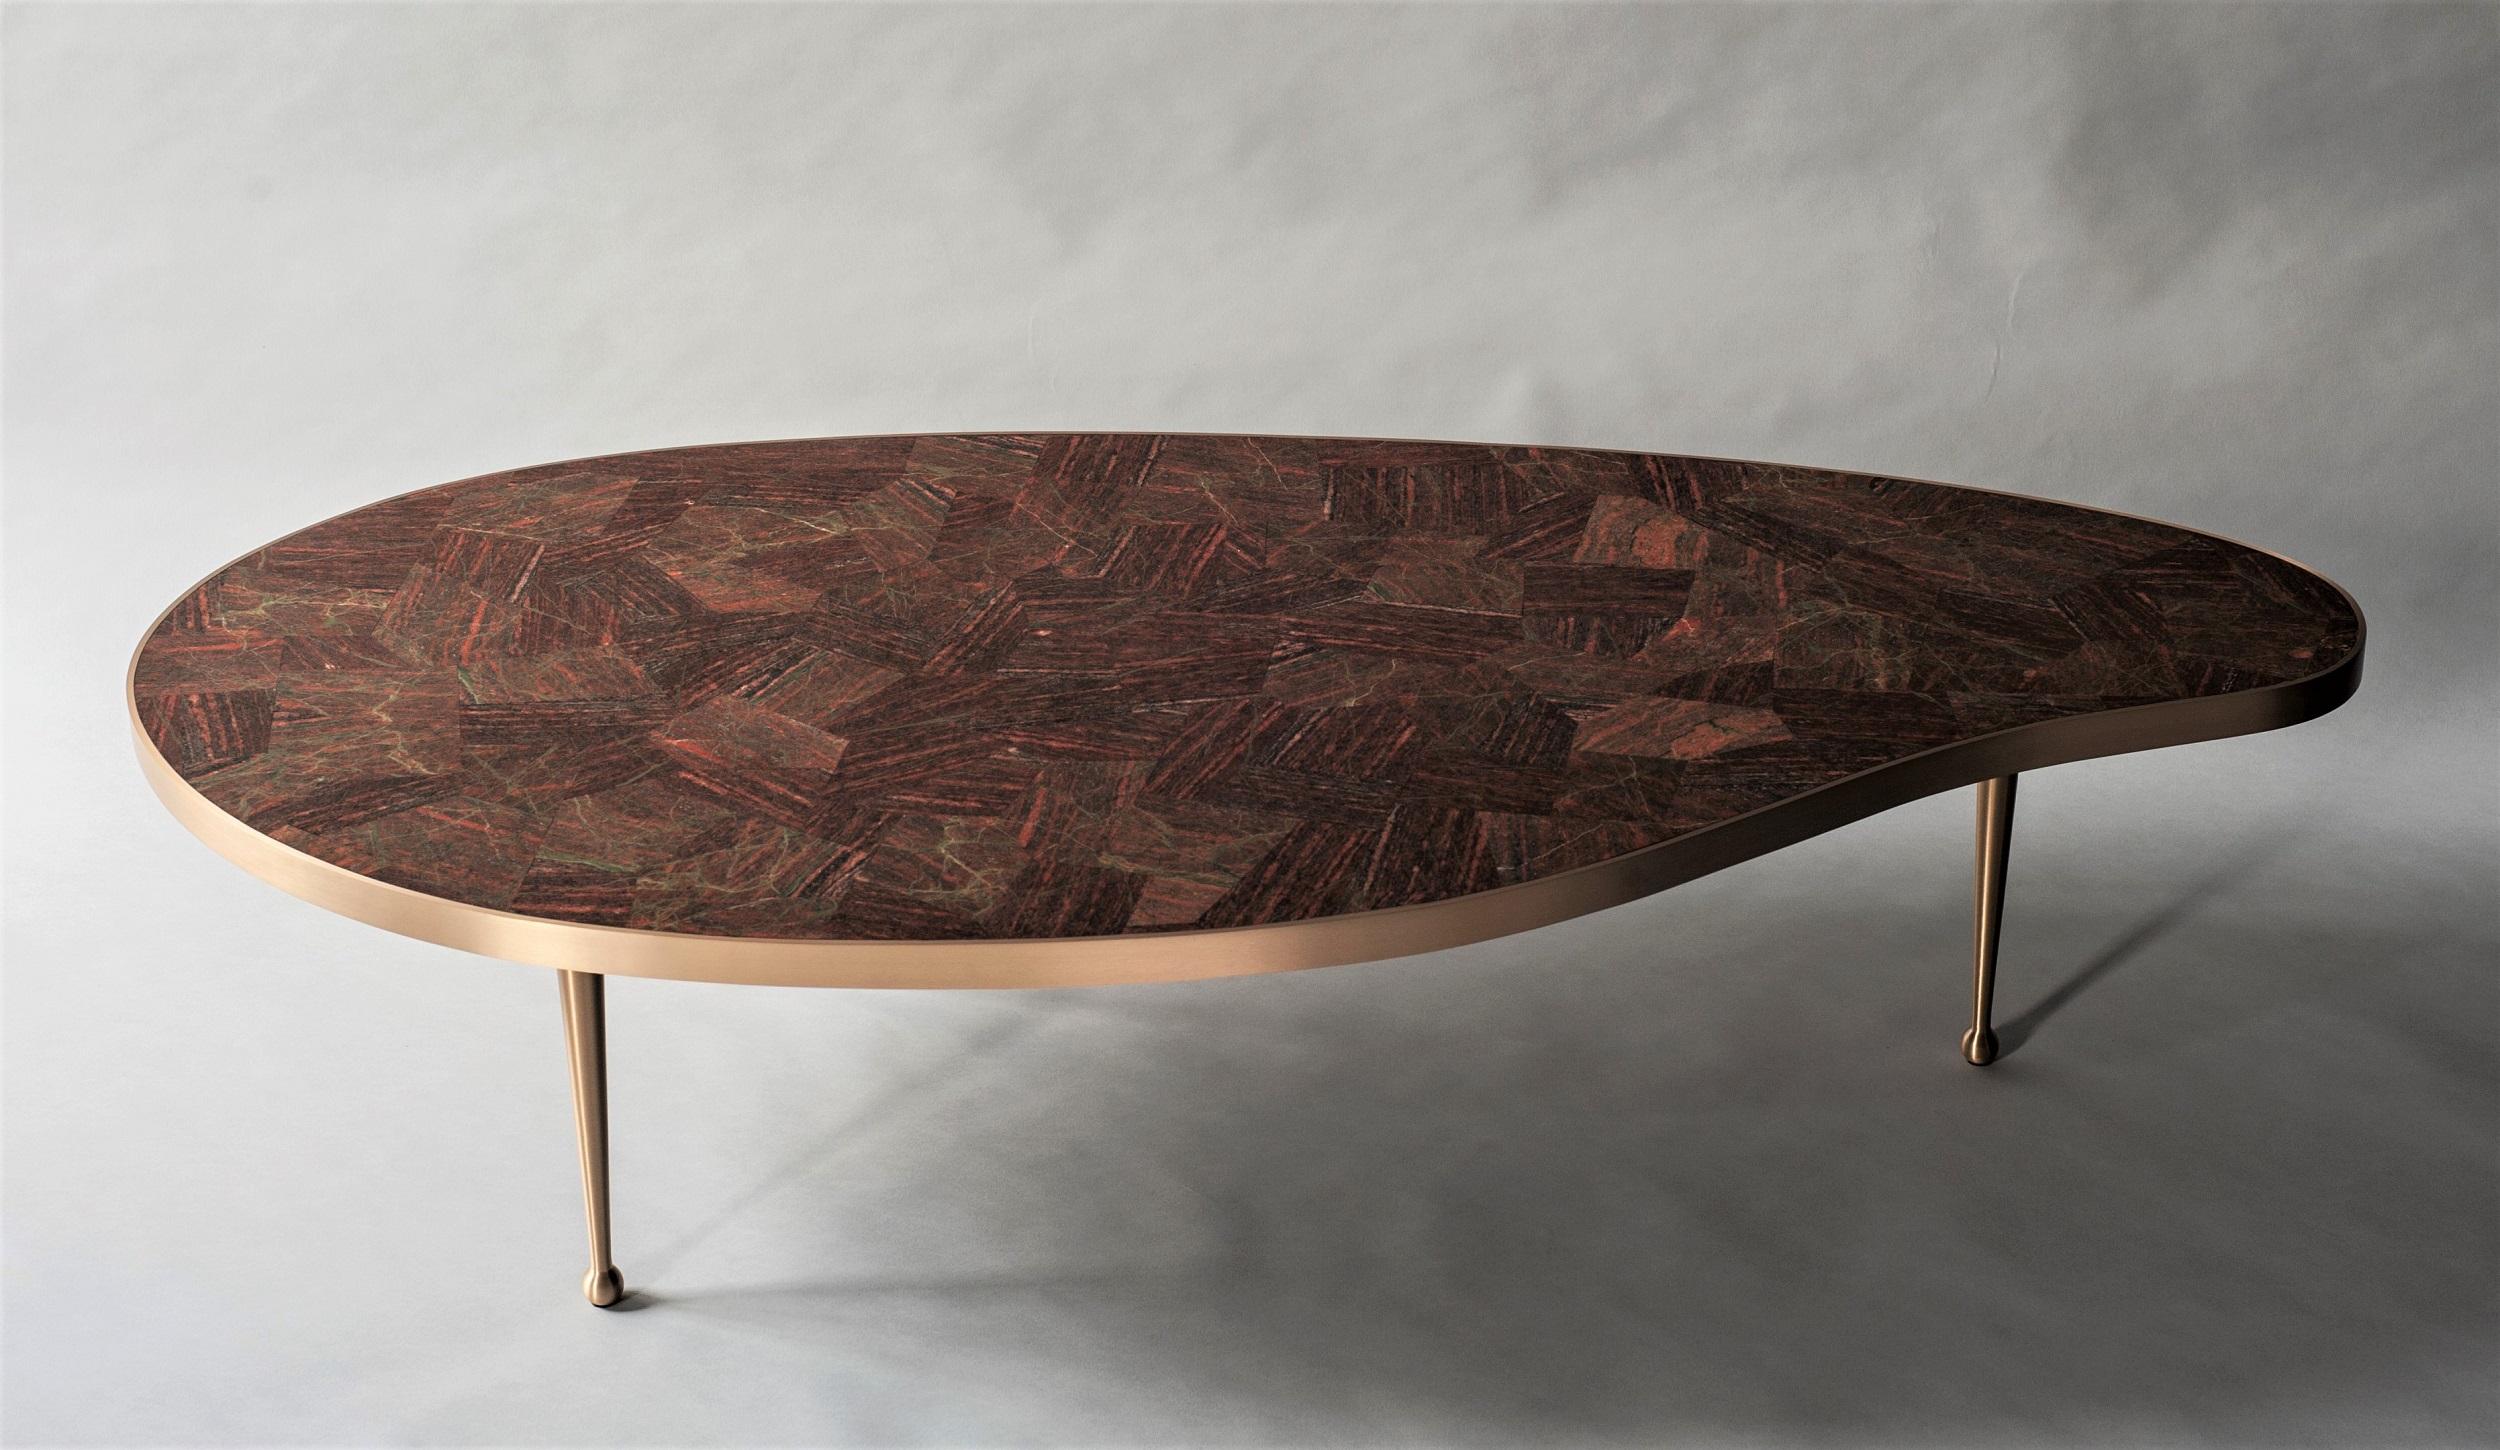 The bio-morphic shape and clean lines of the Lola coffee table by DeMuro Das were inspired by midcentury design. With a stone top made of polished, hand-laid Unakite, the table surface is both luxurious and functional. Hand-cast, solid satin brass